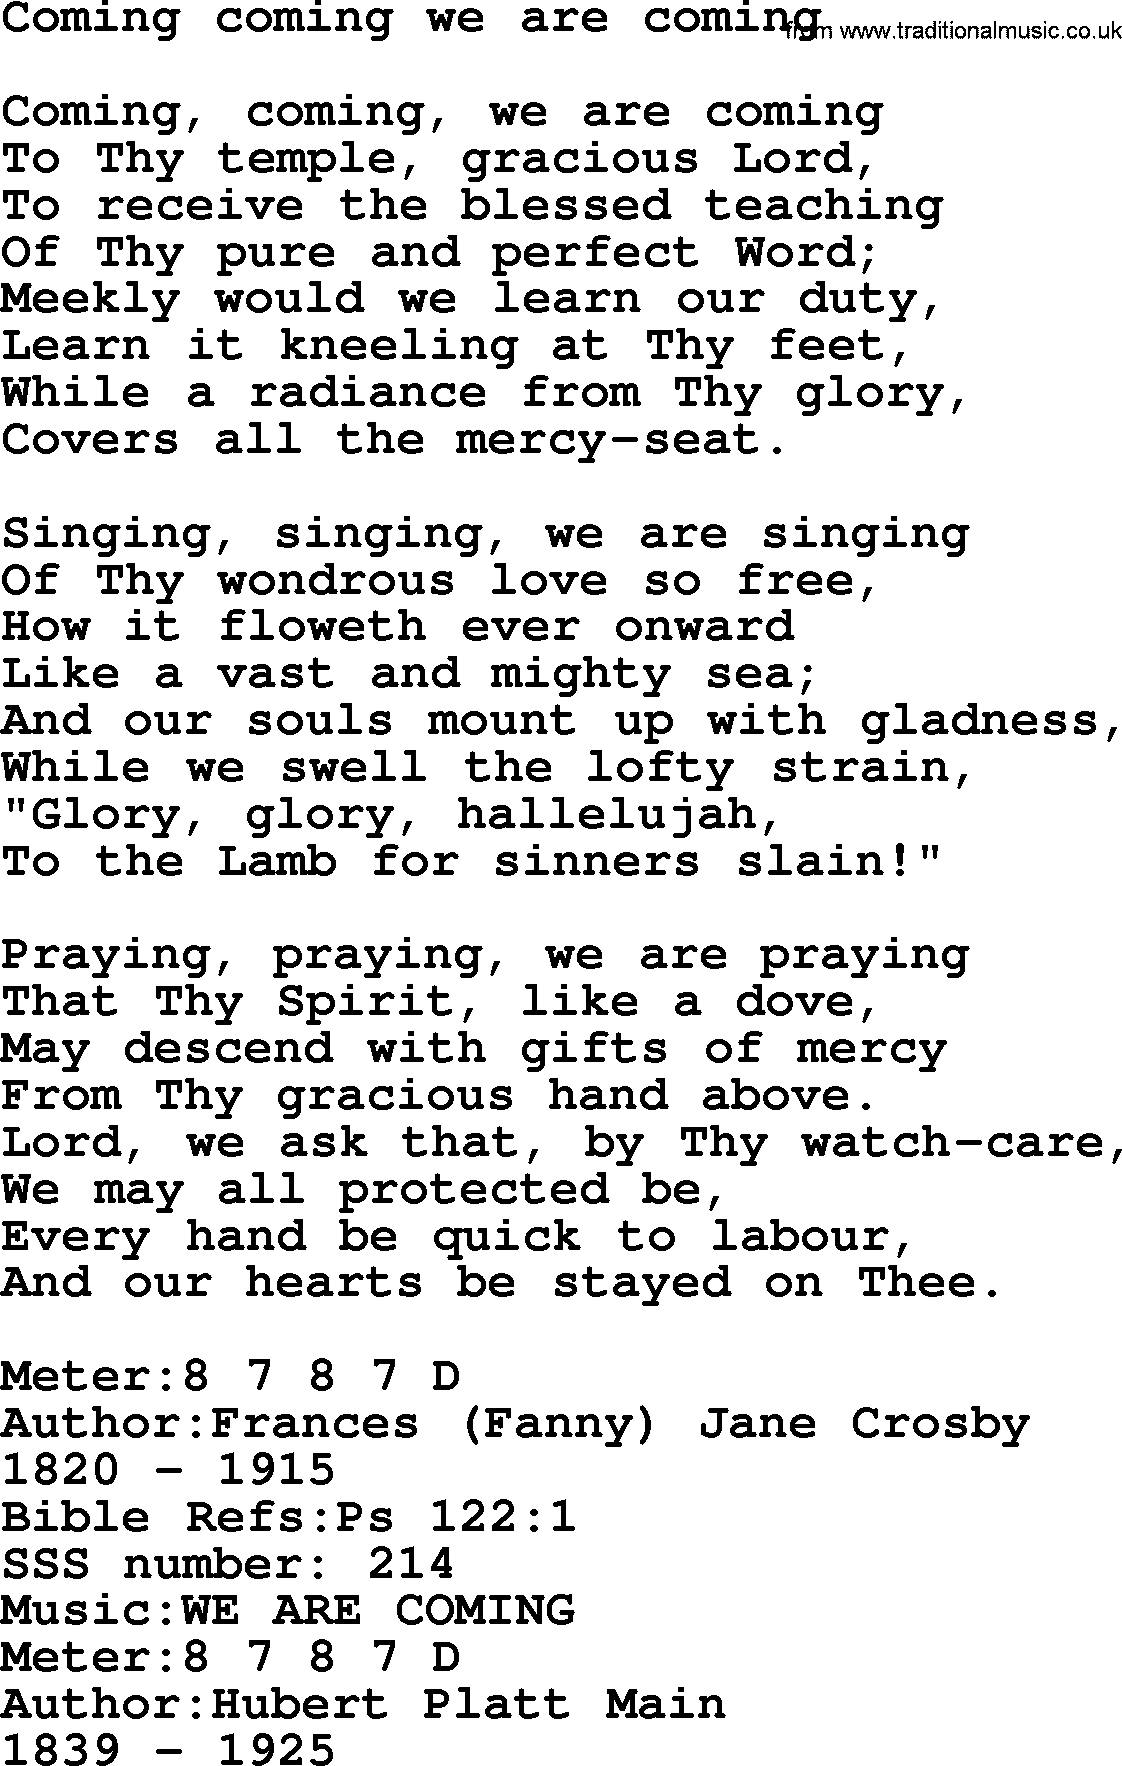 Sacred Songs and Solos complete, 1200 Hymns, title: Coming Coming We Are Coming, lyrics and PDF